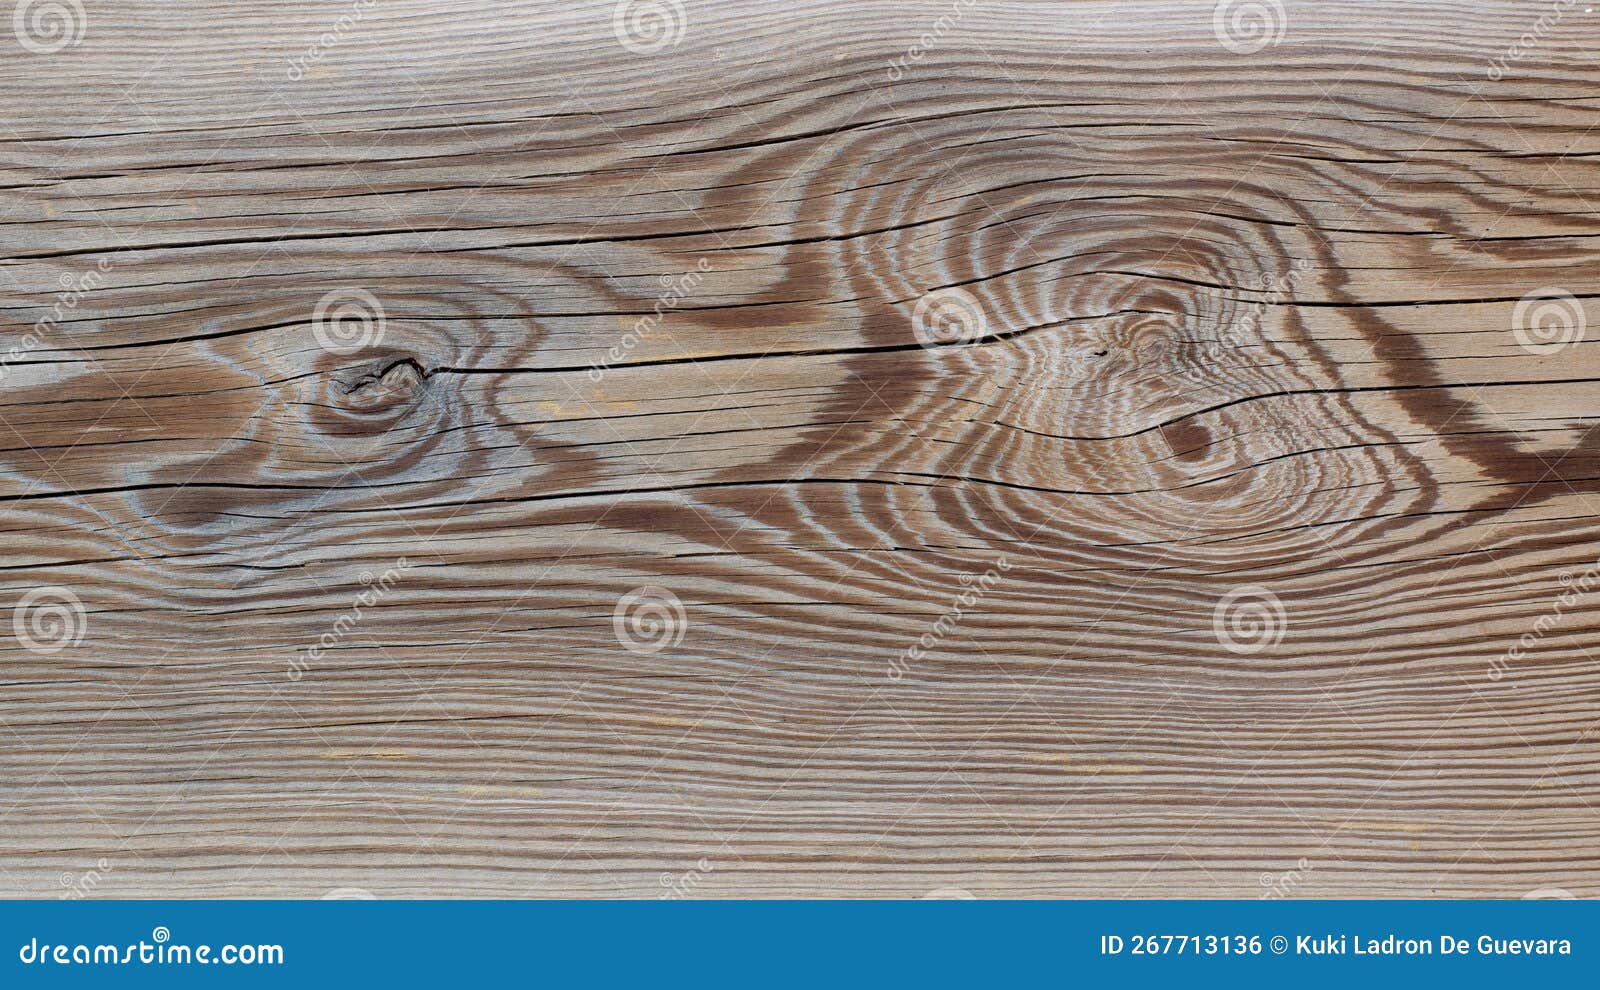 old wooden plank, background texture